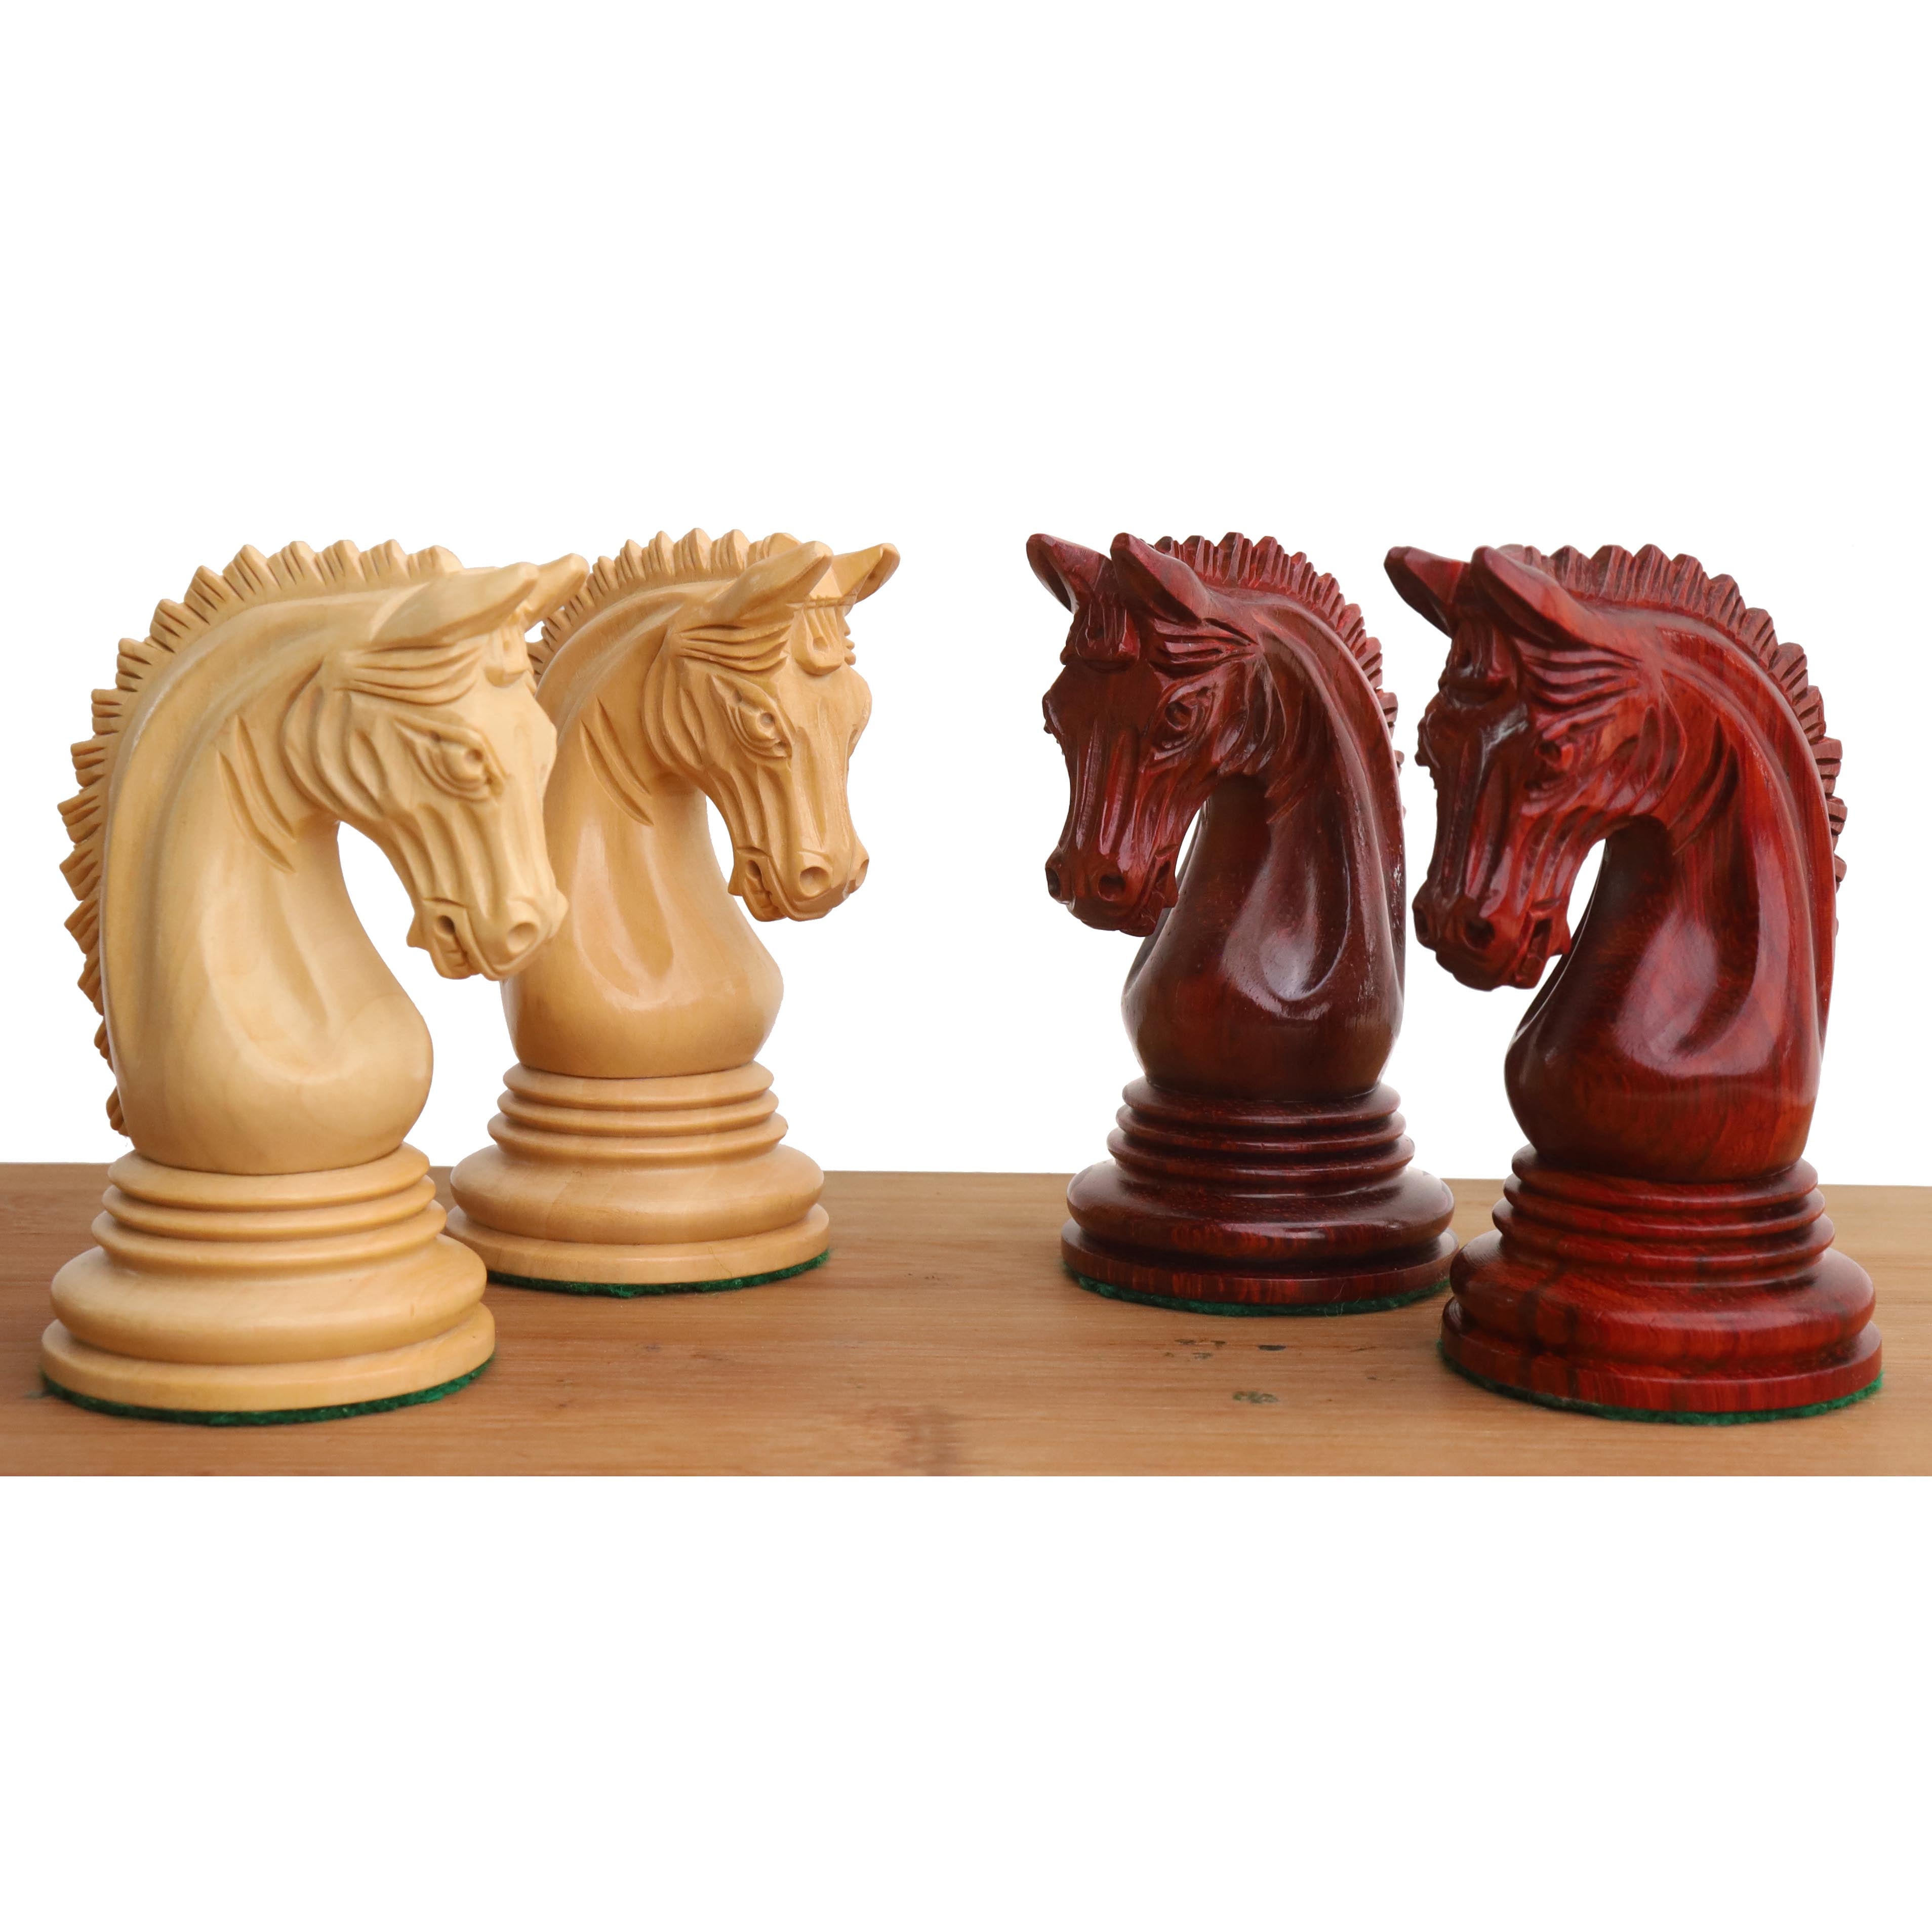 Combo of Luxury Augustus Staunton Chess Set - Pieces in Bud Rosewood with 23 inches Board and Storage Box